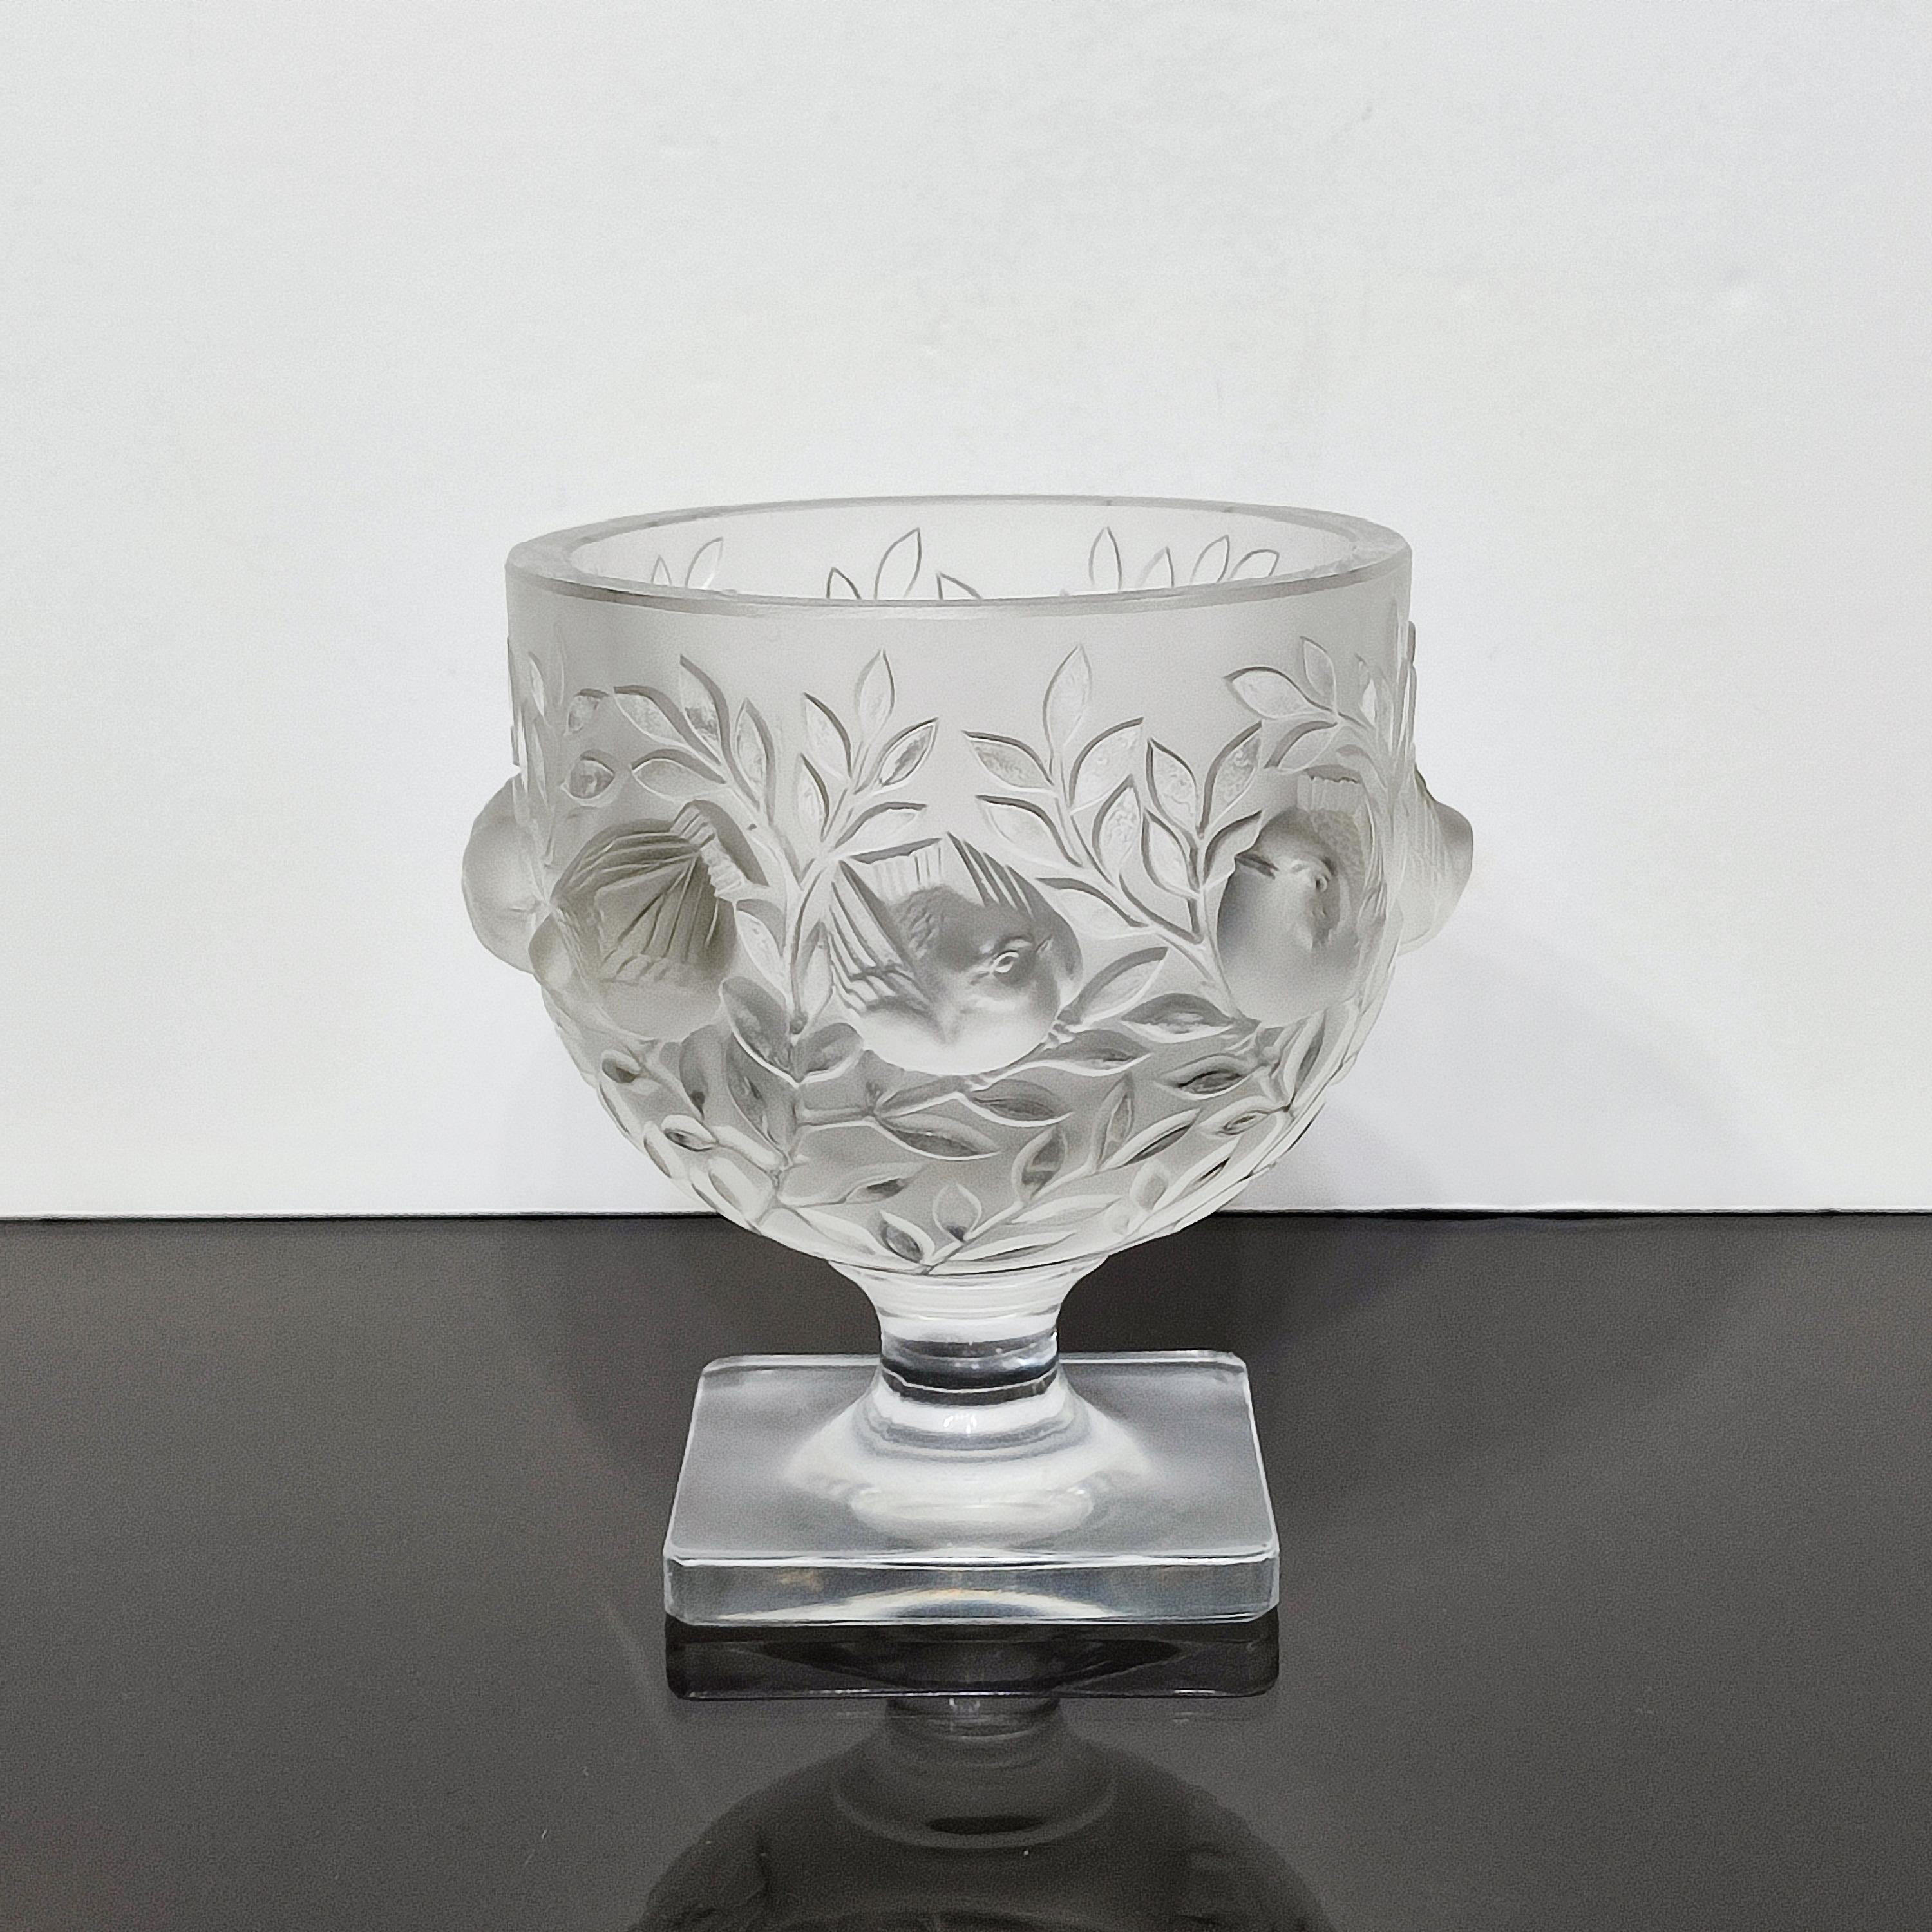 Elisabeth vase by Lalique.
Frosted crystal bowl with clear foliage branches and frosted birds all around. Clear pedestal on square foot. Signed to underside, Lalique, France. 
Designed by Marc Lalique in 1961, this vase remains a perennial favorite.
